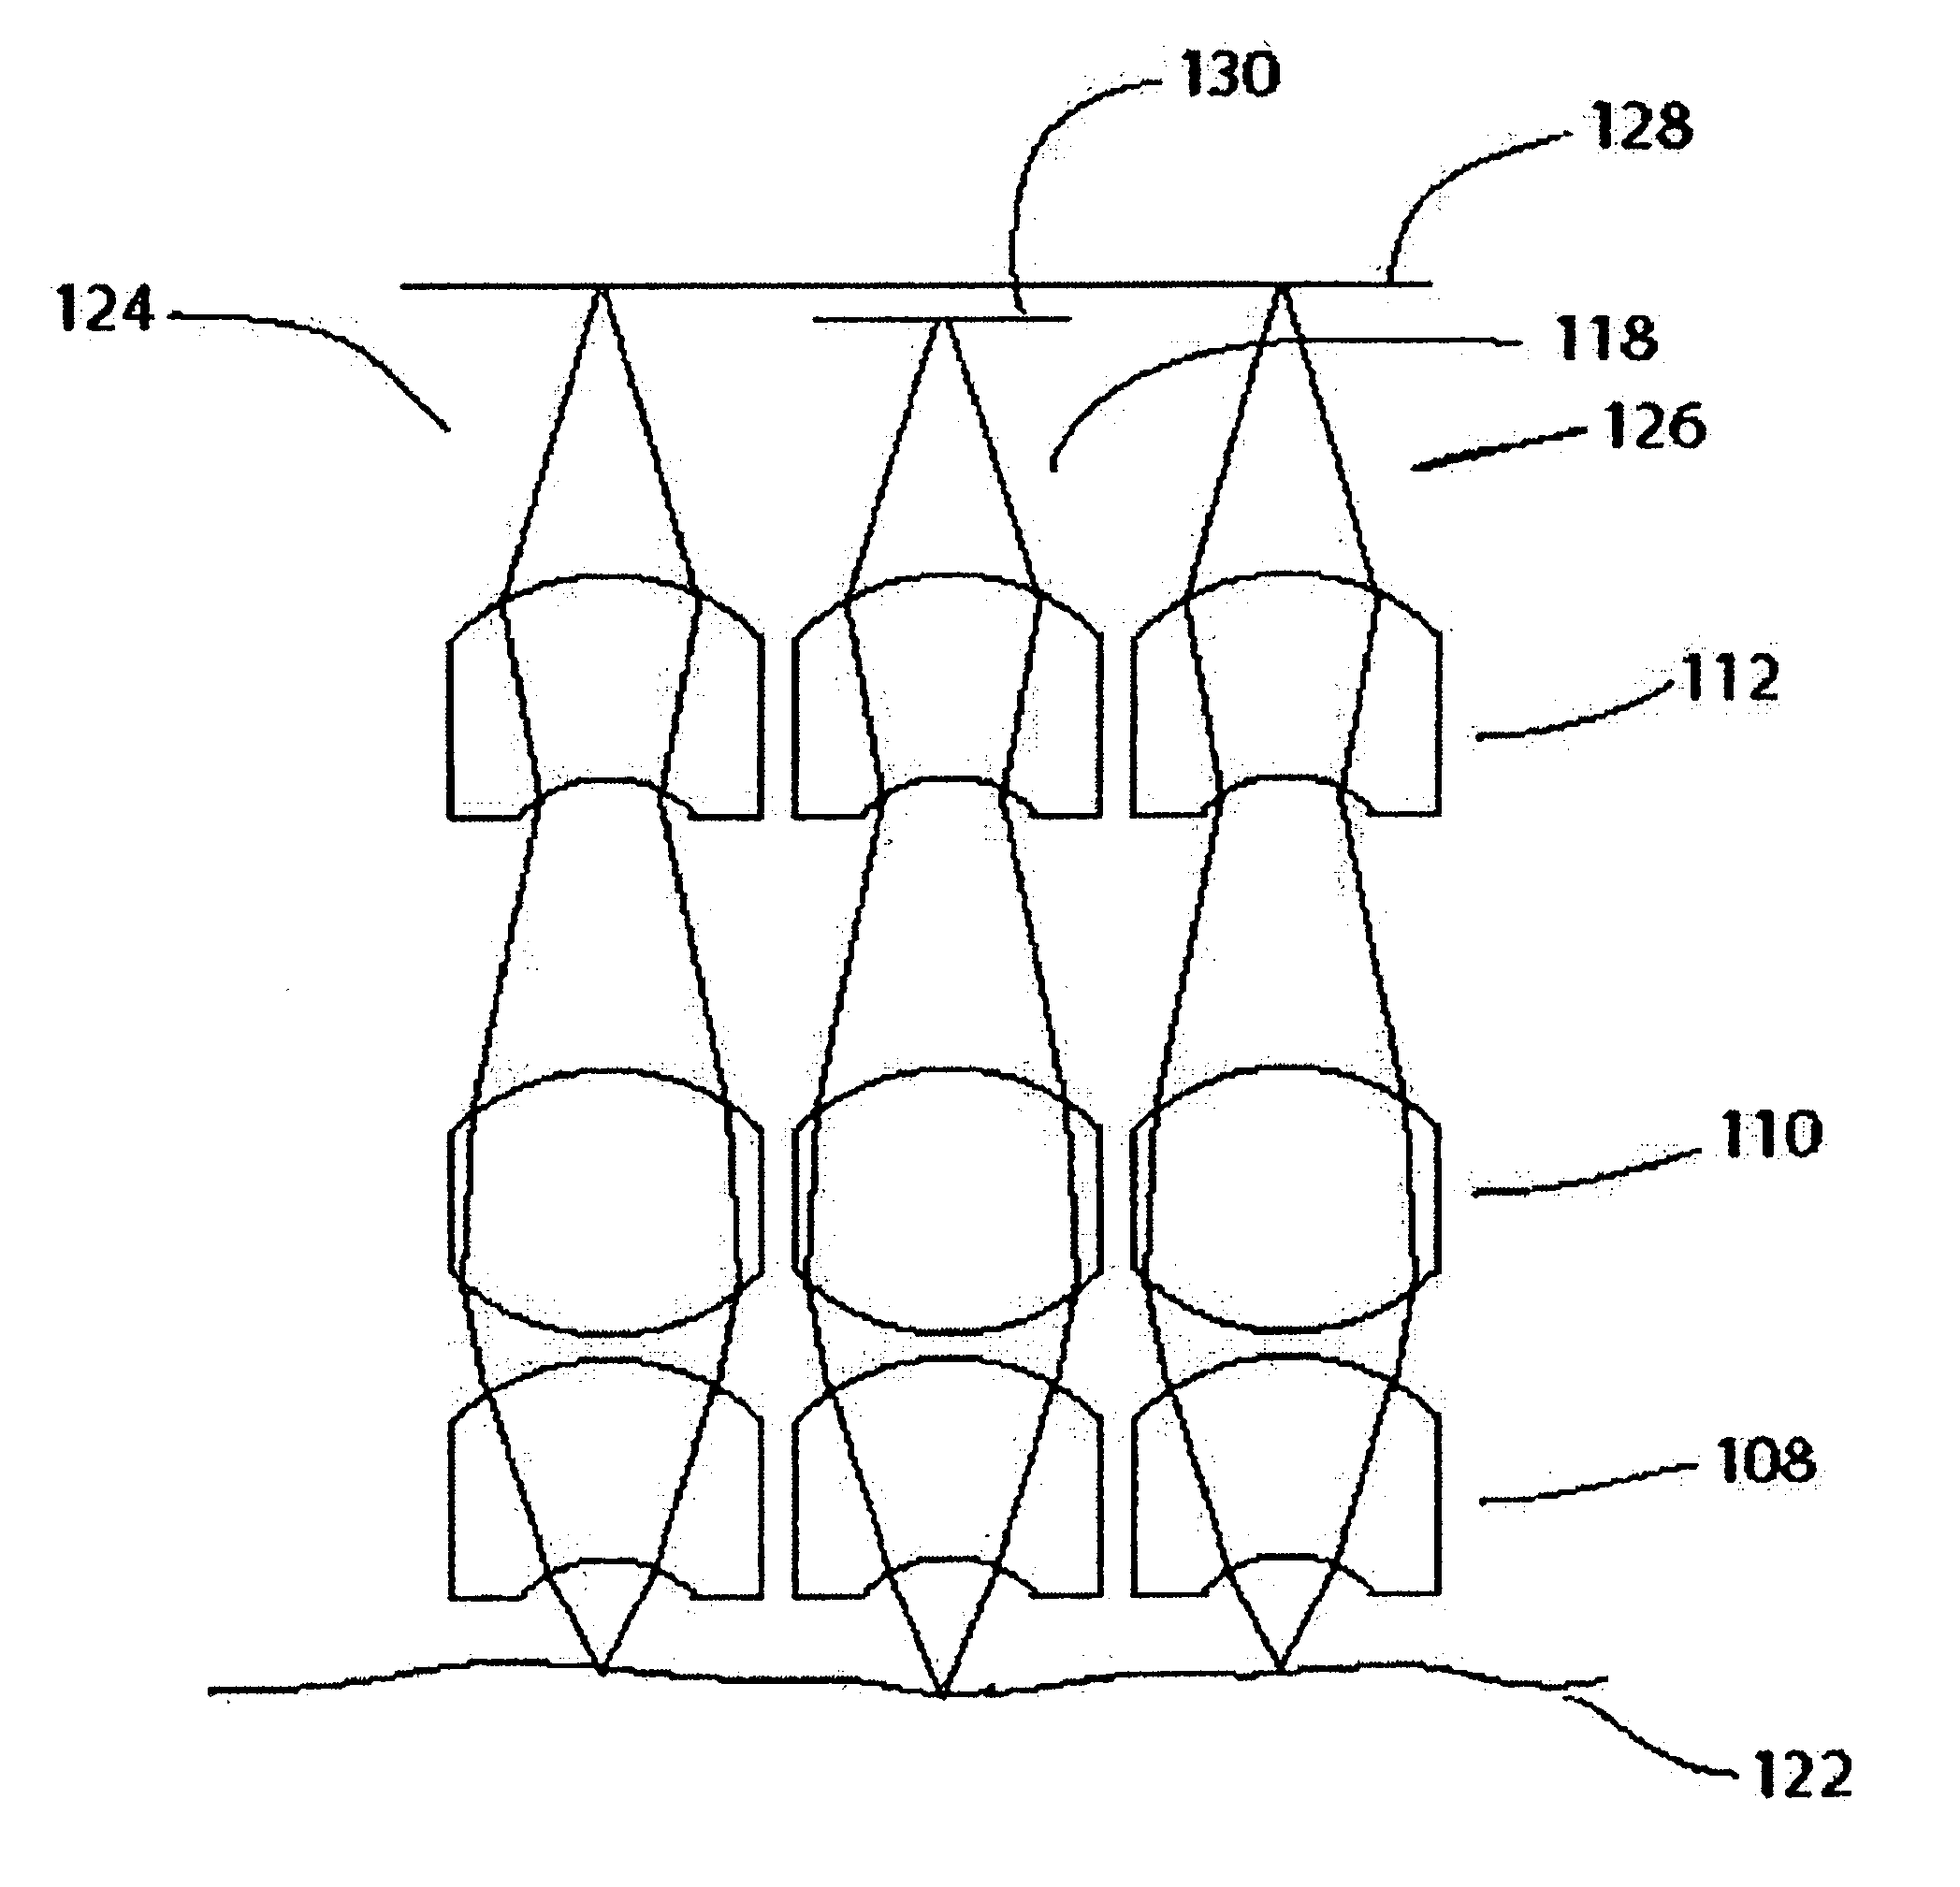 Multi-axis imaging system having individually-adjustable elements